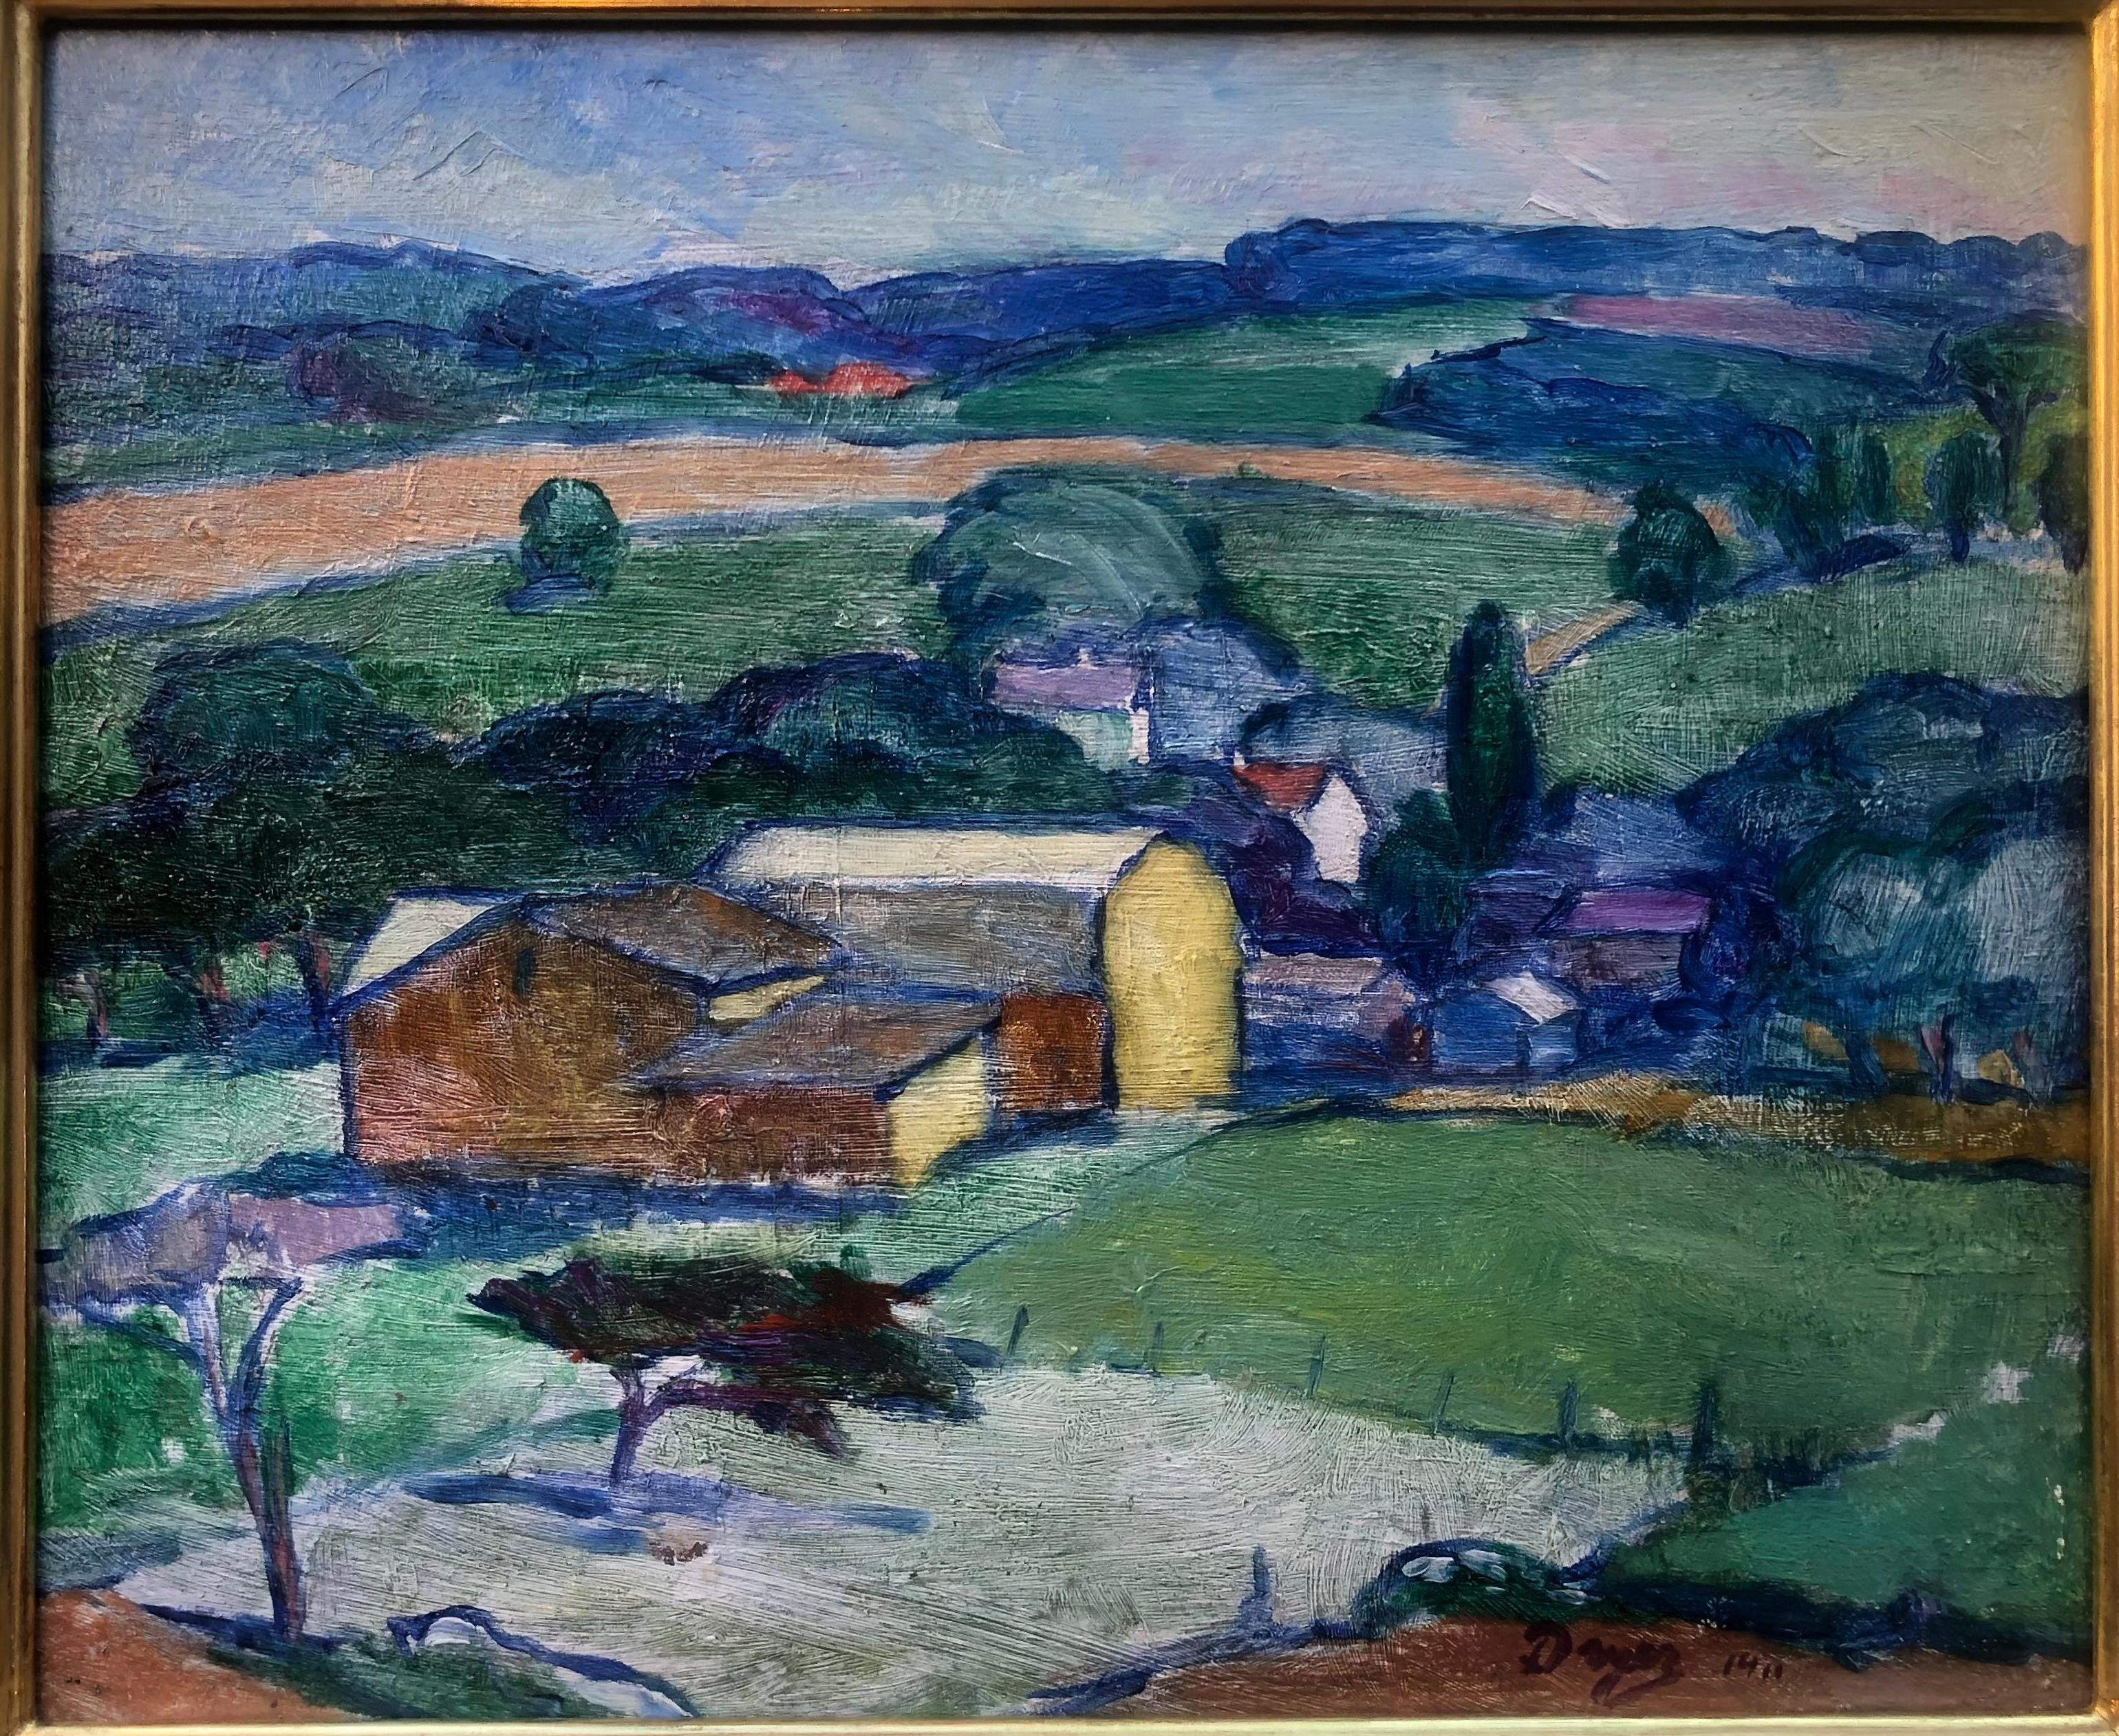 Fine oil painting on chamfered wood panel by listed Franco-American painter Rufus J Dryer (1880-1937). The artist was associated with American Bucks County School, but spent much of his professional artistic career in Paris in the Salon d'Automne